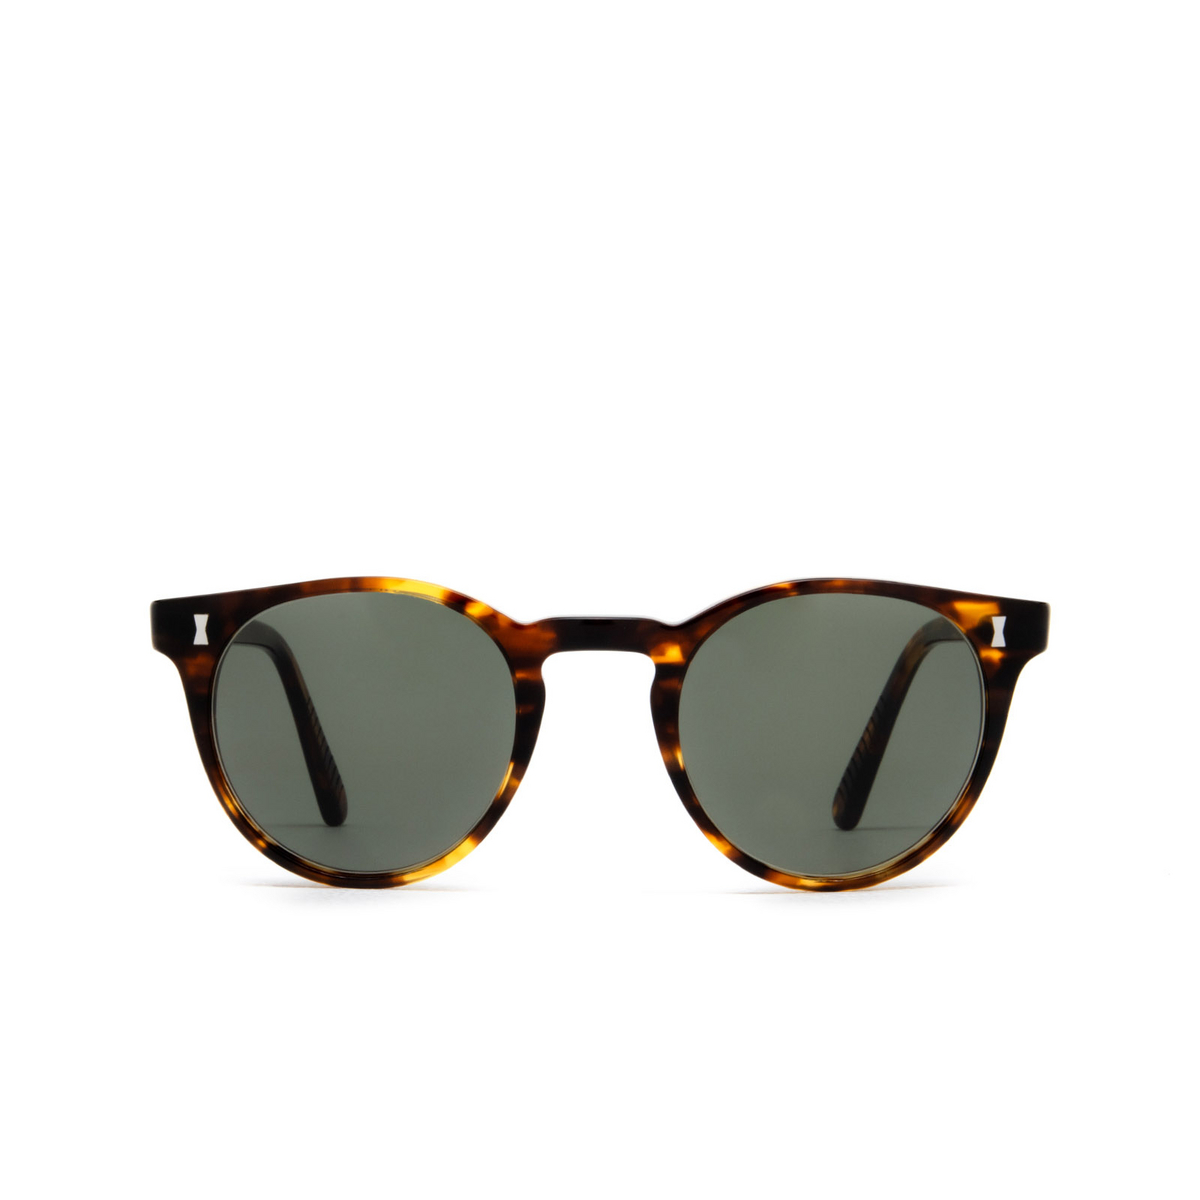 Cubitts HERBRAND Sunglasses HER-R-LIG Light Turtle - front view